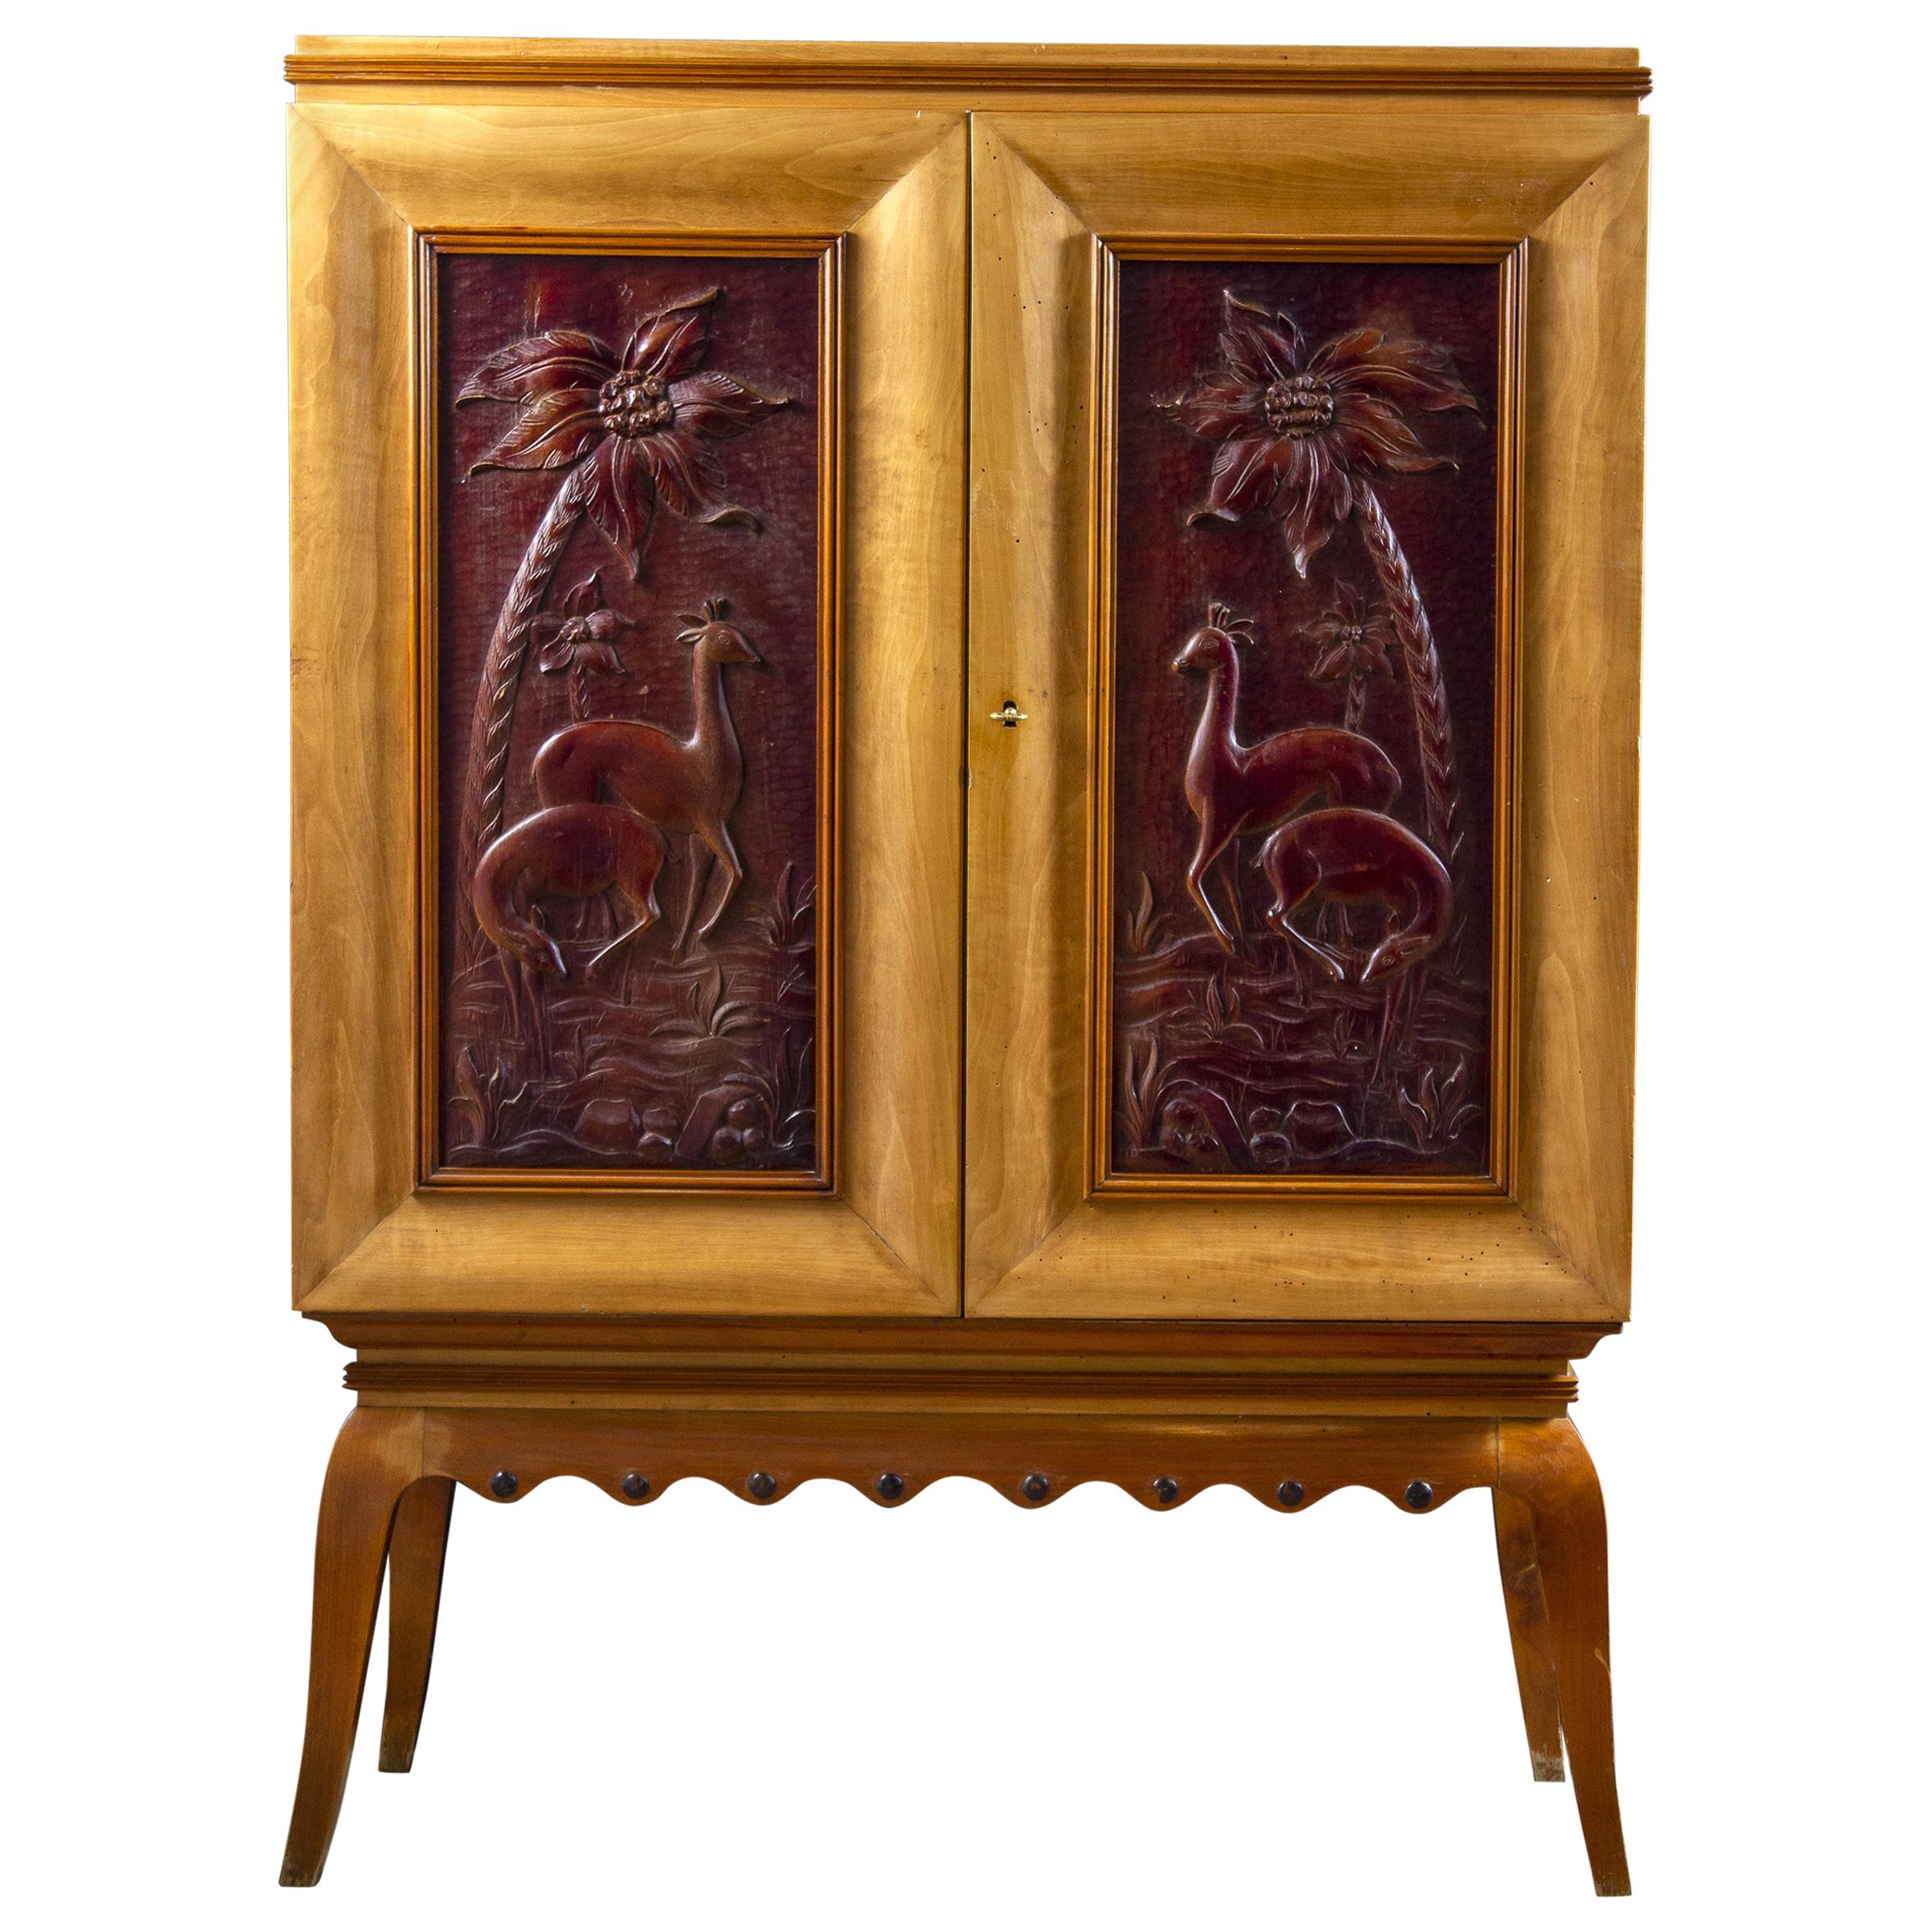 Elegant and unusual bar cabinet.
Decorated front door with finely carved bas-reliefs deer panel door that opens to a mosaic mirror lined interior with one glass shelf and three pull-out drawers. Door panels inside with mosaic mirror and elegant